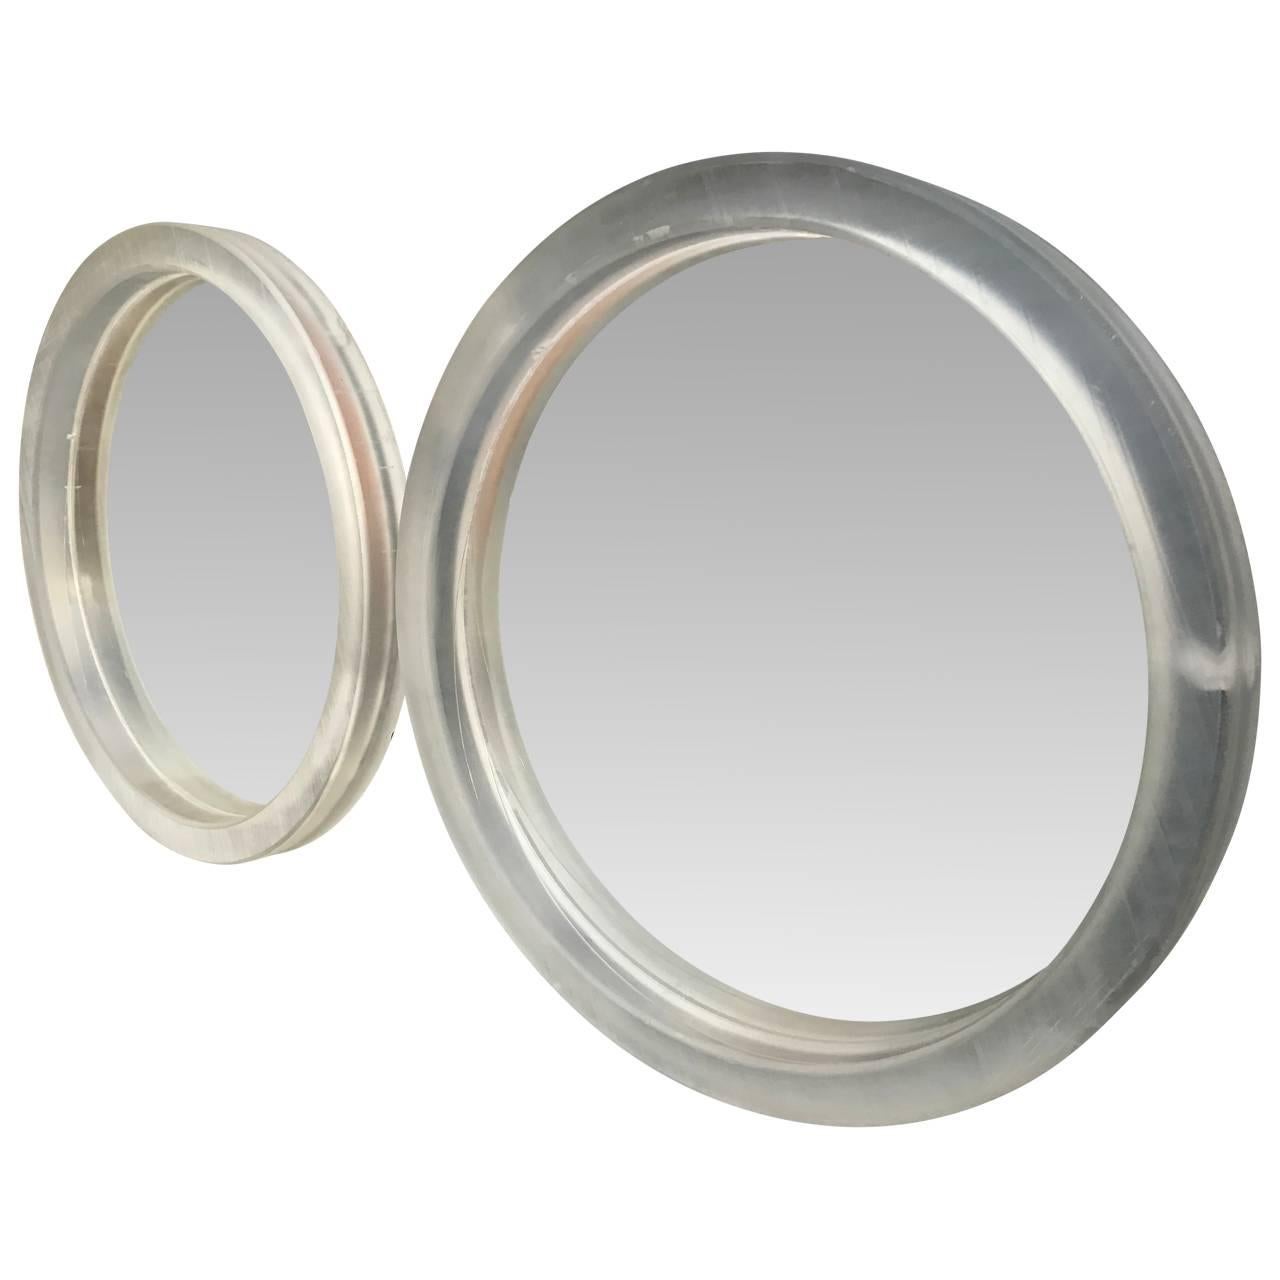 Pair Of Large Modern Round Thick Lucite Mirrors